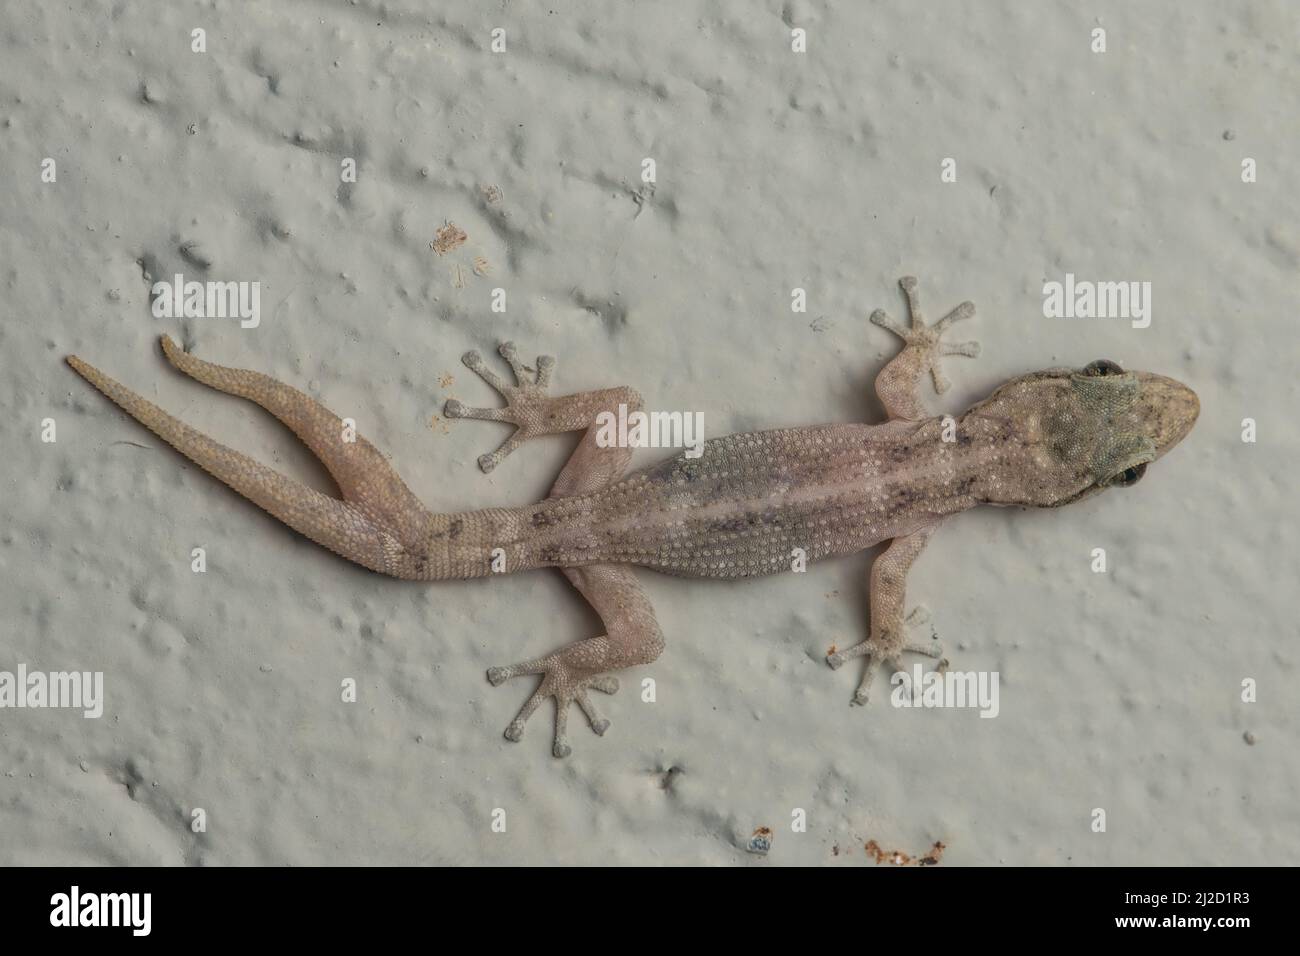 A coastal leaf toed gecko (Phyllodactylus reissii) in Ecuador with abnormal tail regeneration where the tail has split resulting a forked tail. Stock Photo